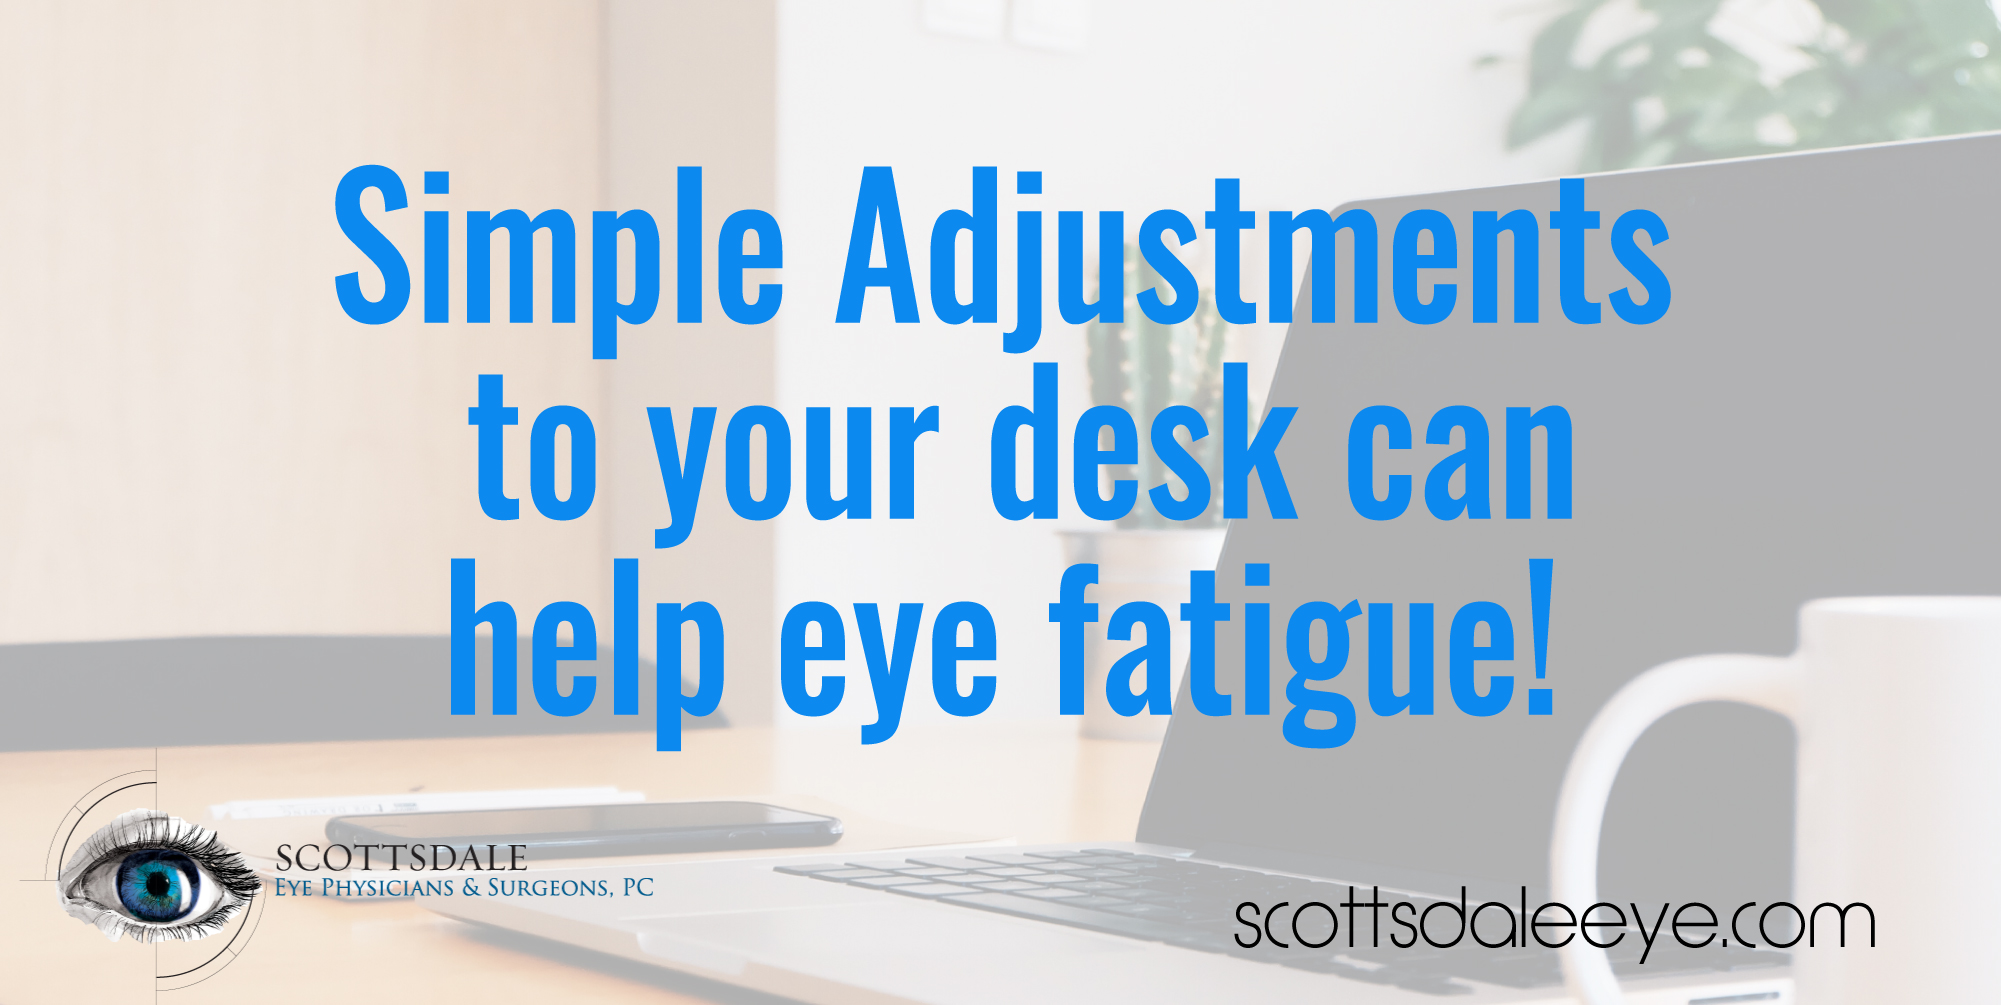 Simple Adjustments to Your Desk Can Help Eye Fatigue